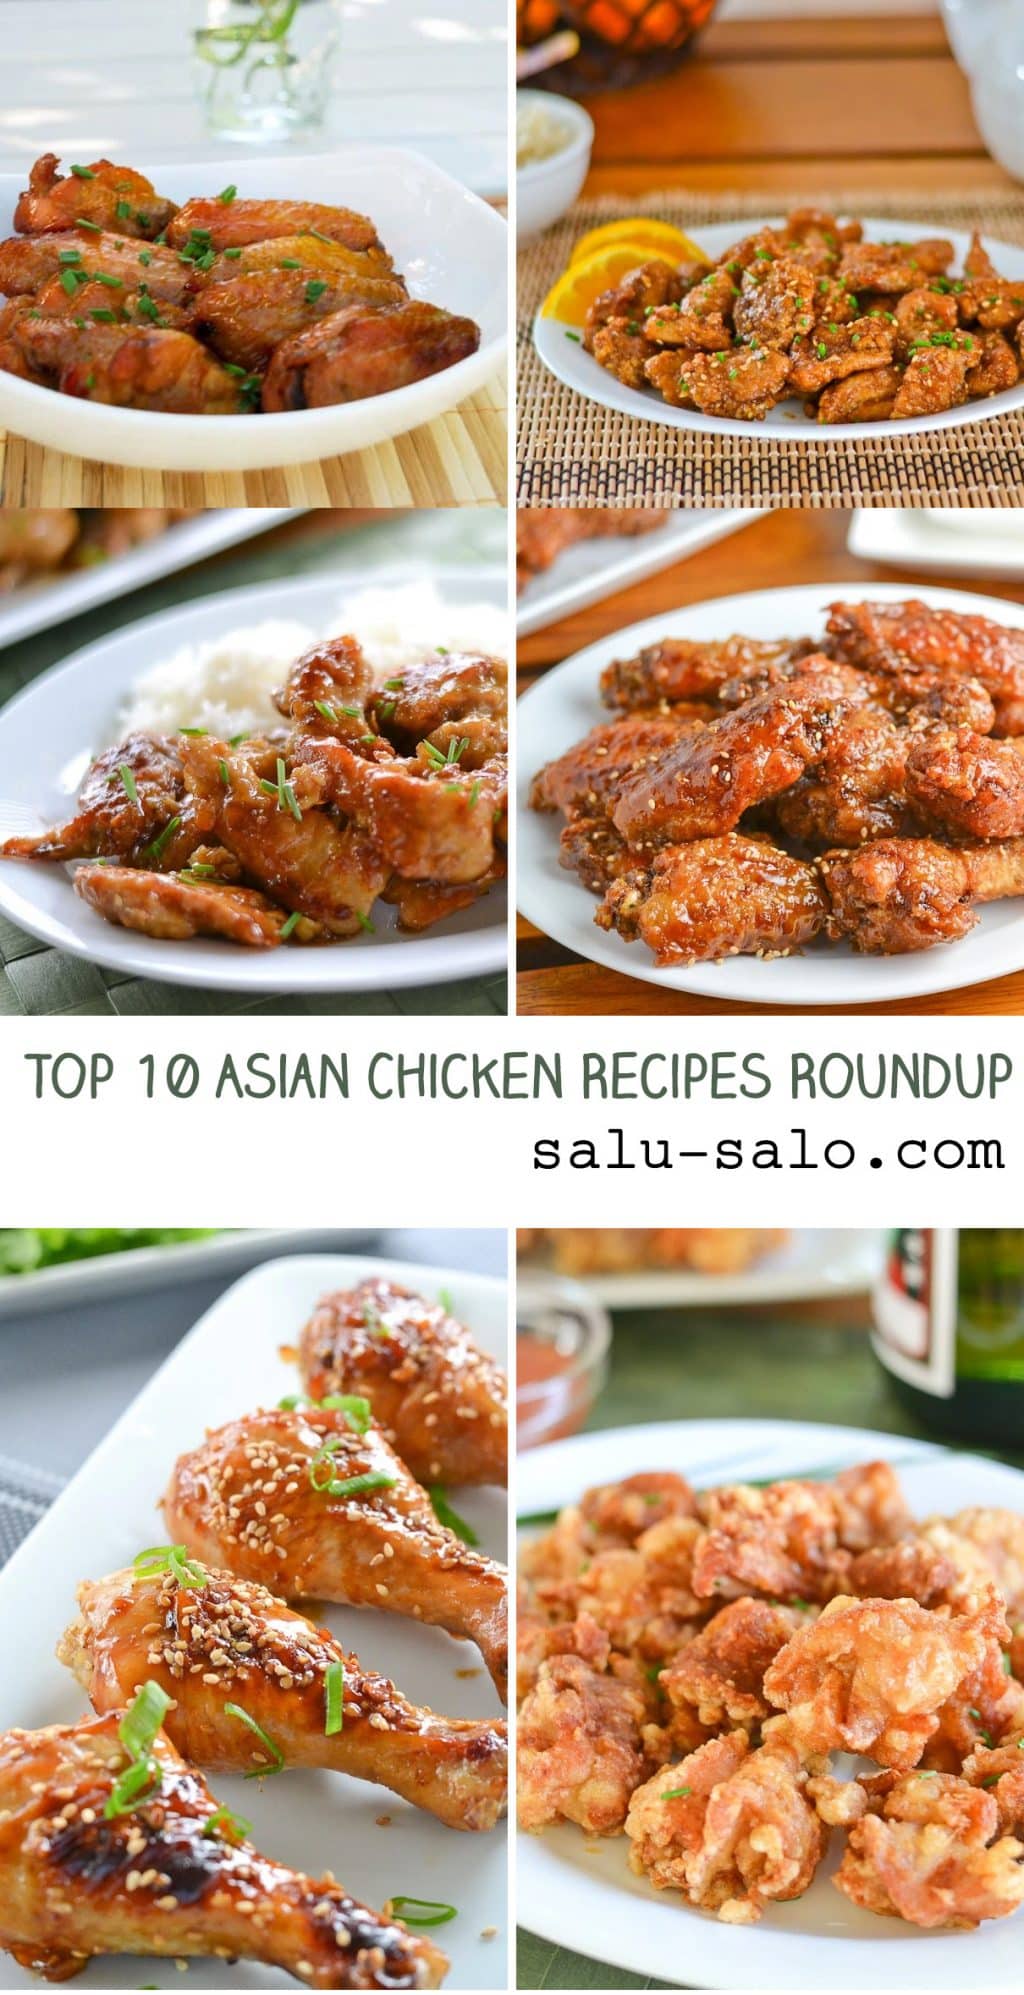 Top 10 Asian Chicken Recipes Roundup